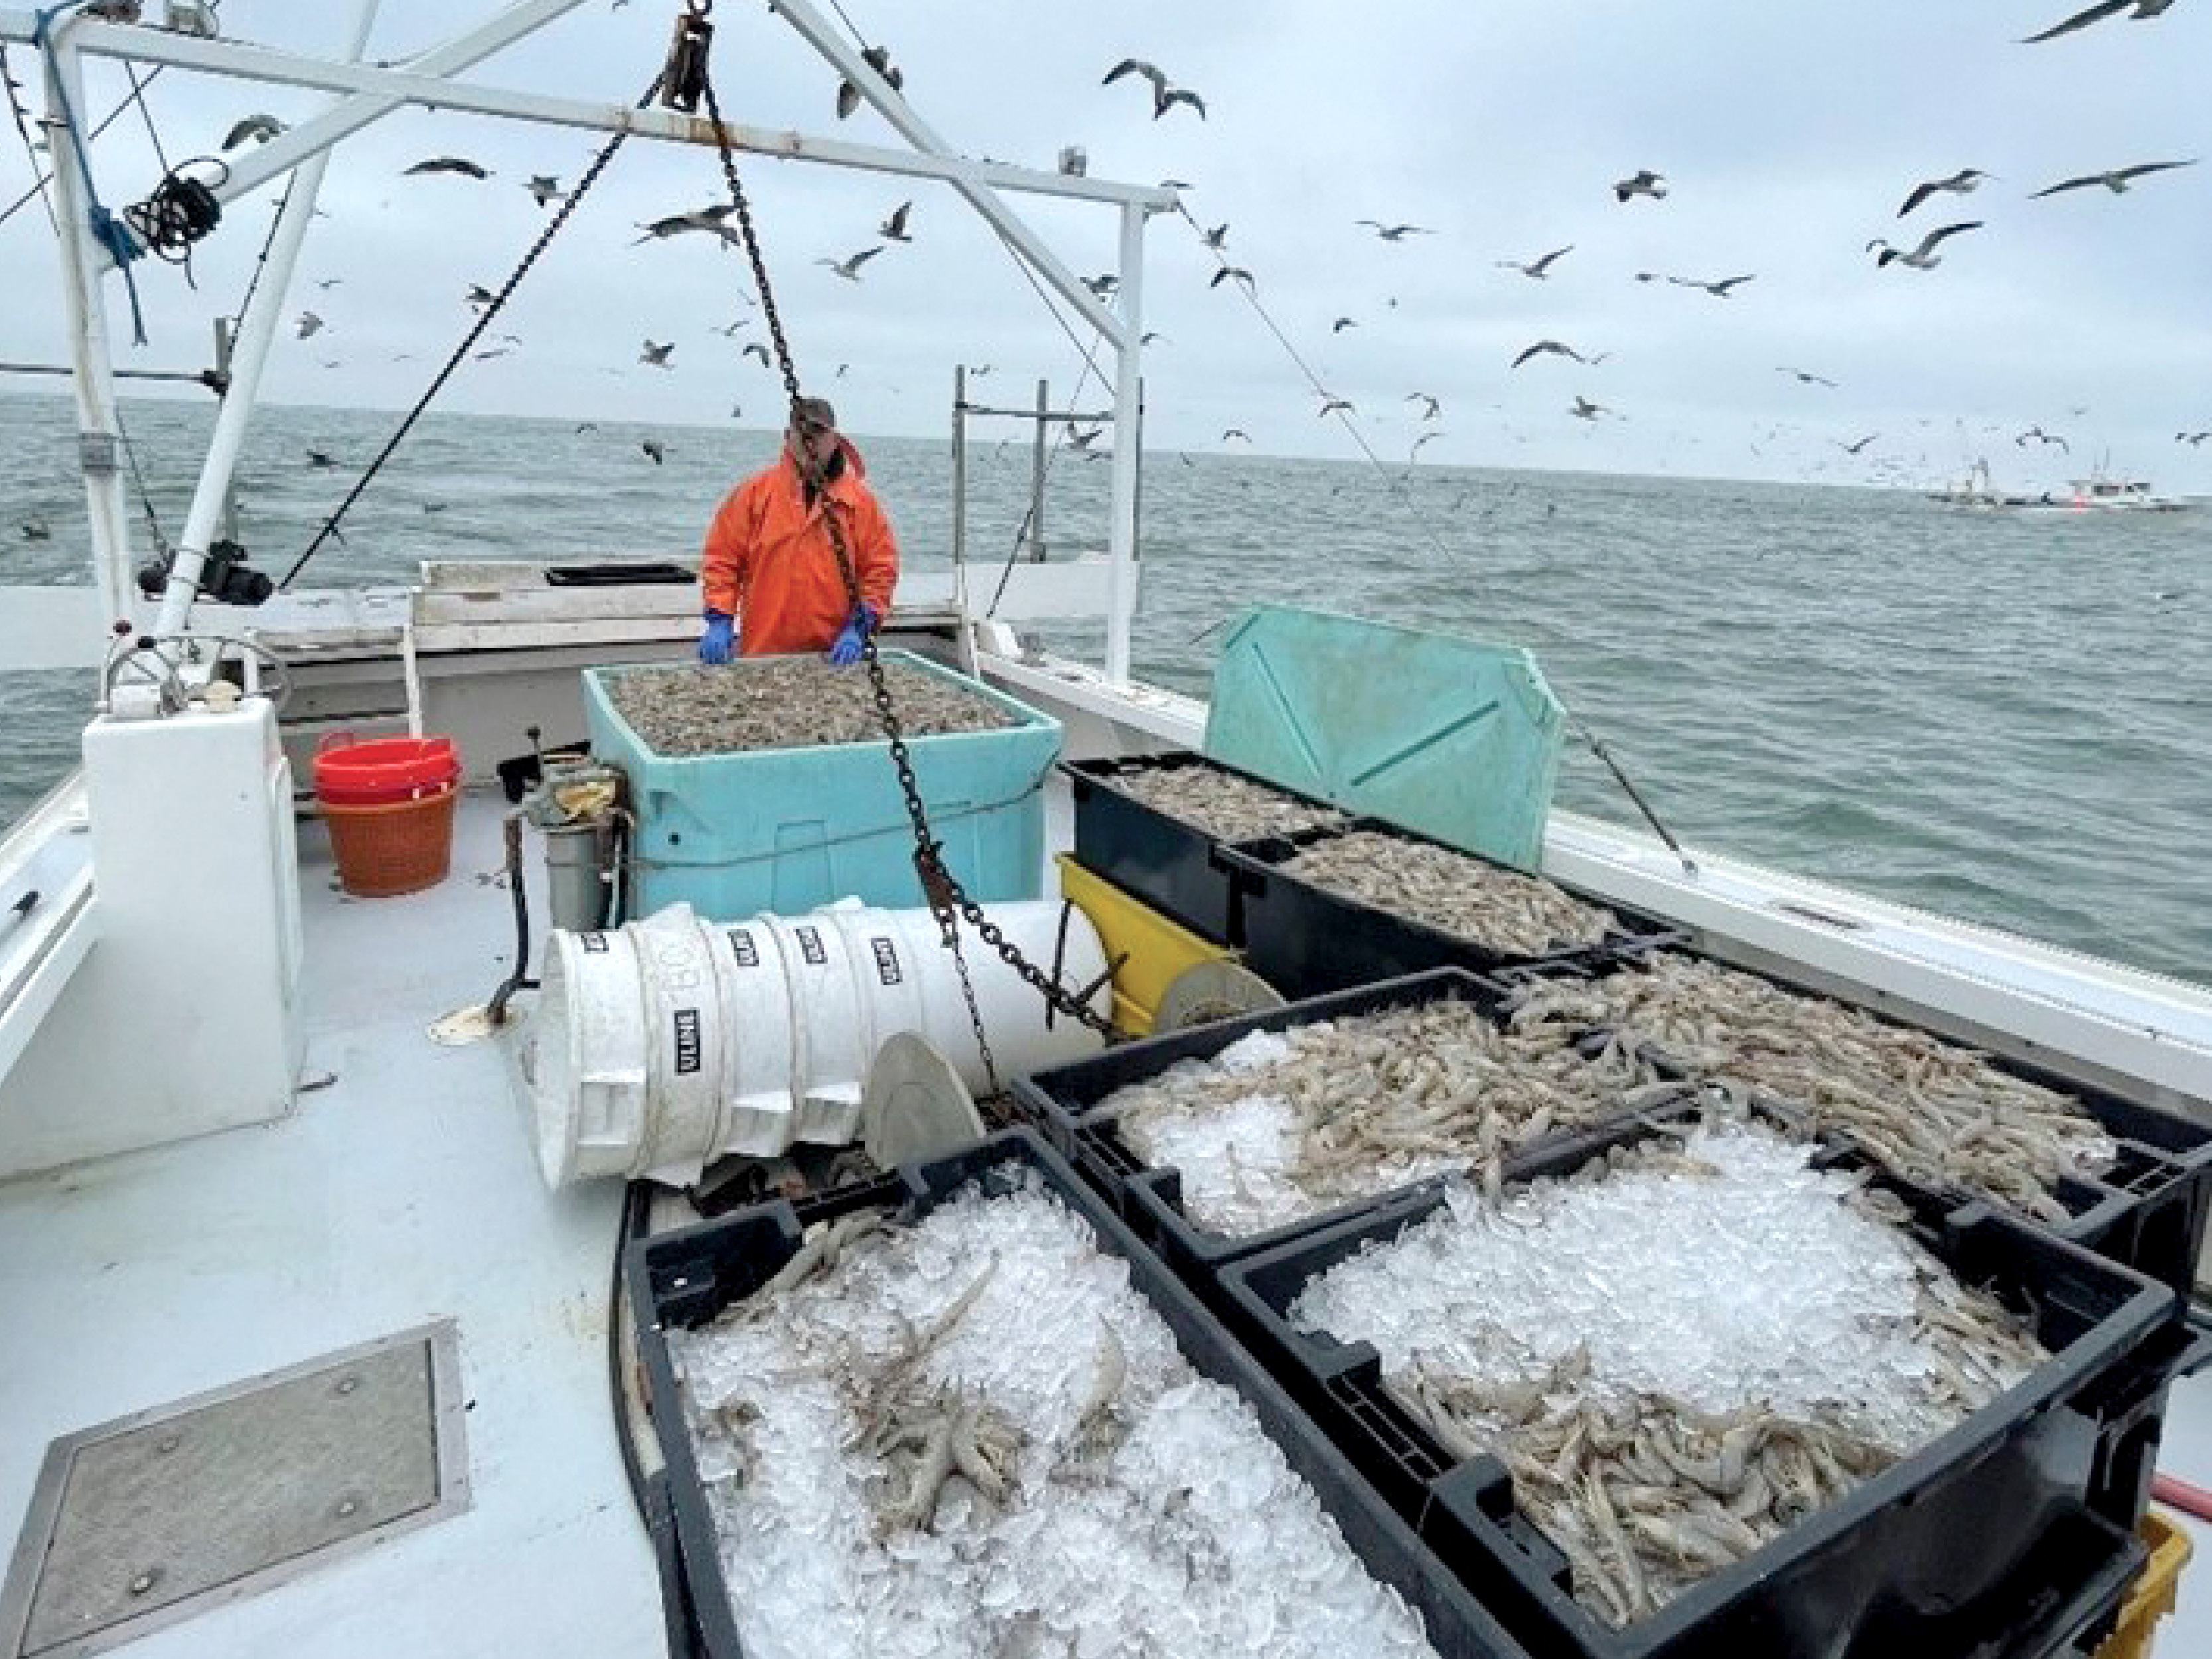 A shifting climate may be bringing a new commercial fishery to the